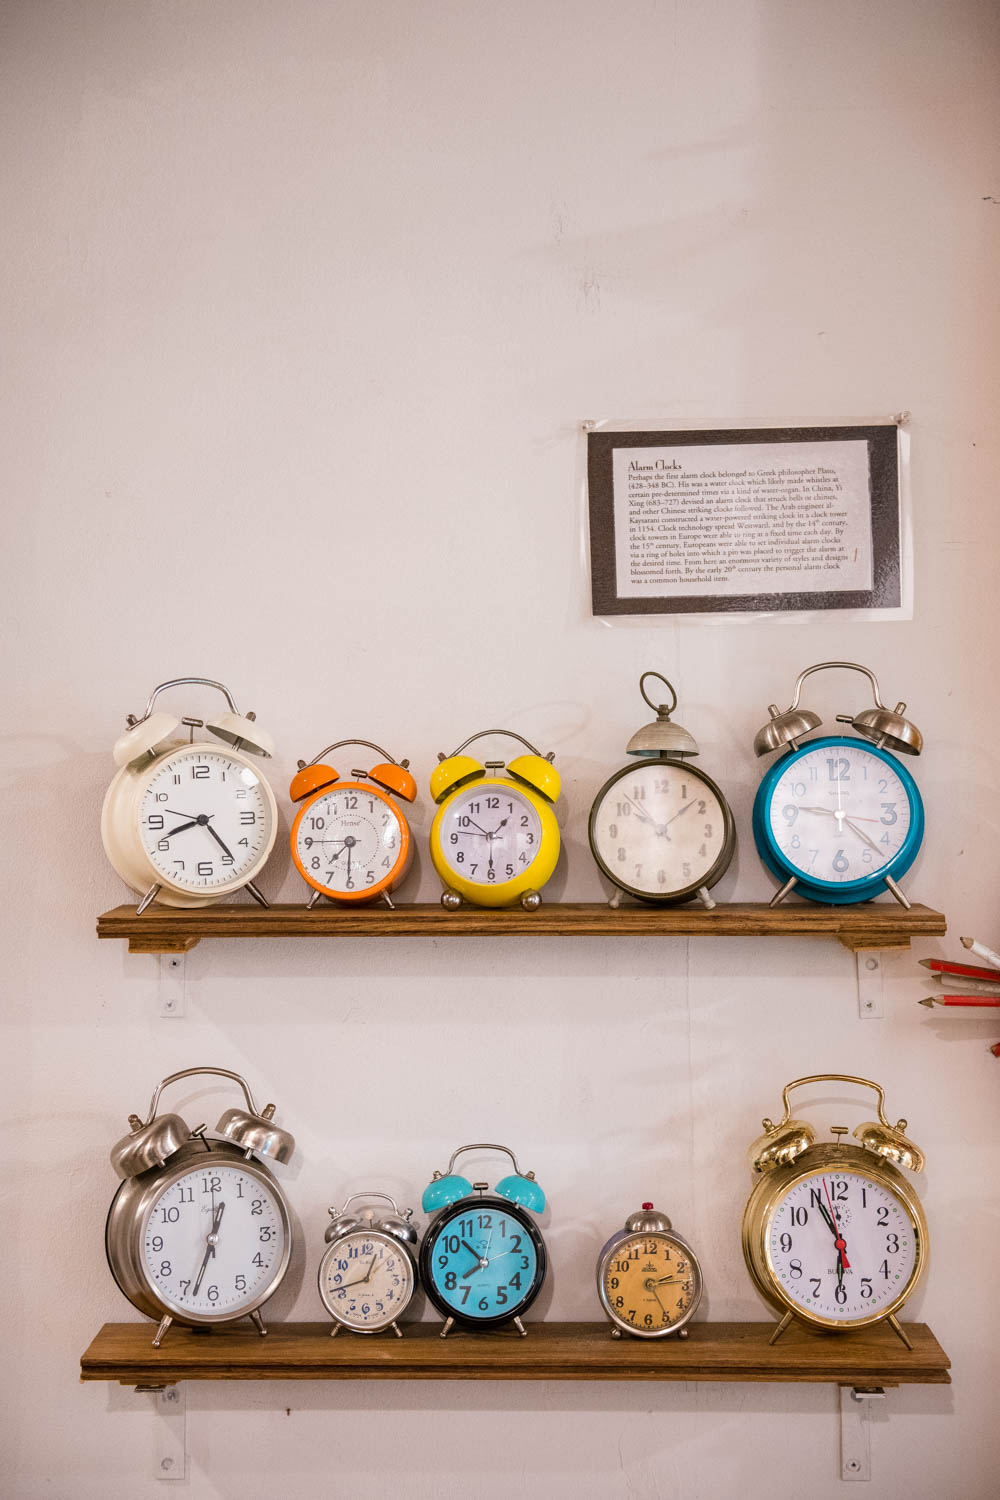 Clocks found in the Museum of Everyday Life in Glover, VT, taken by Accidentally Wes Anderson